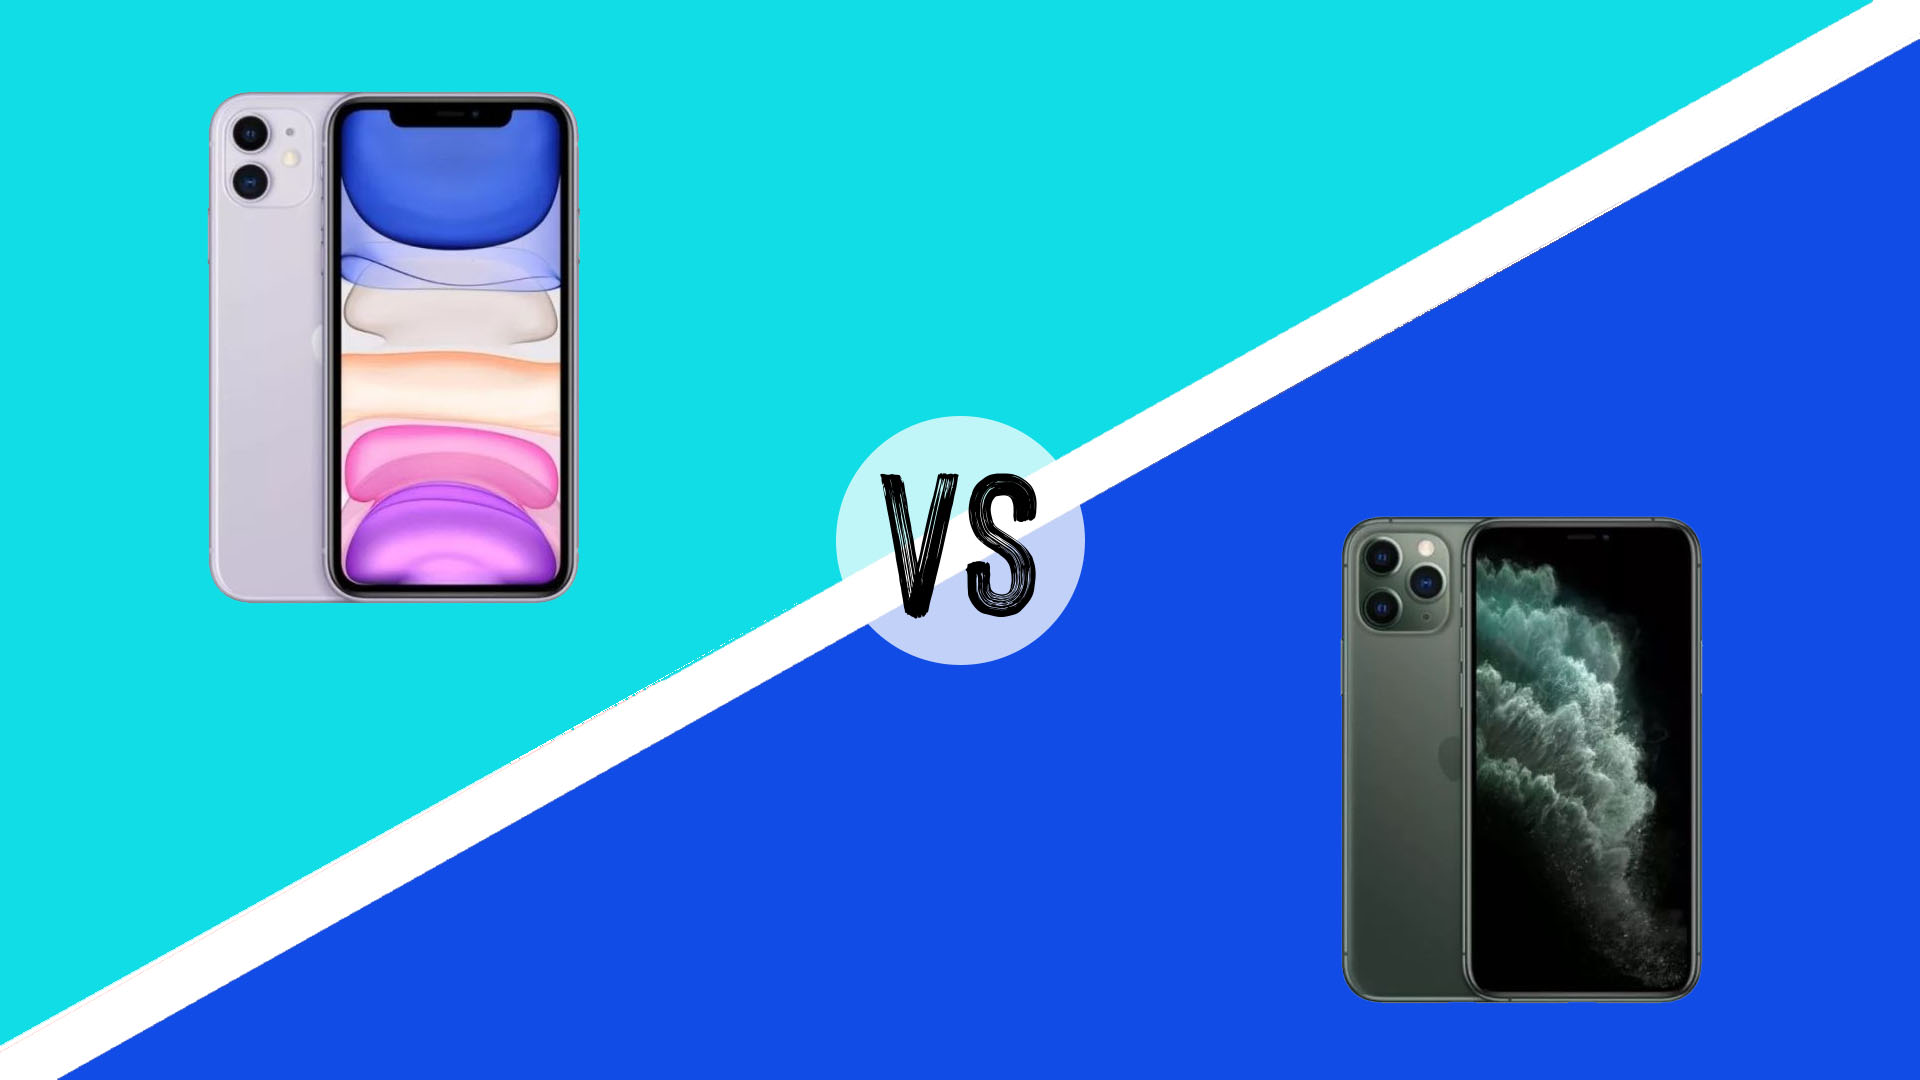 iPhone 11 review: The best iPhone for most people